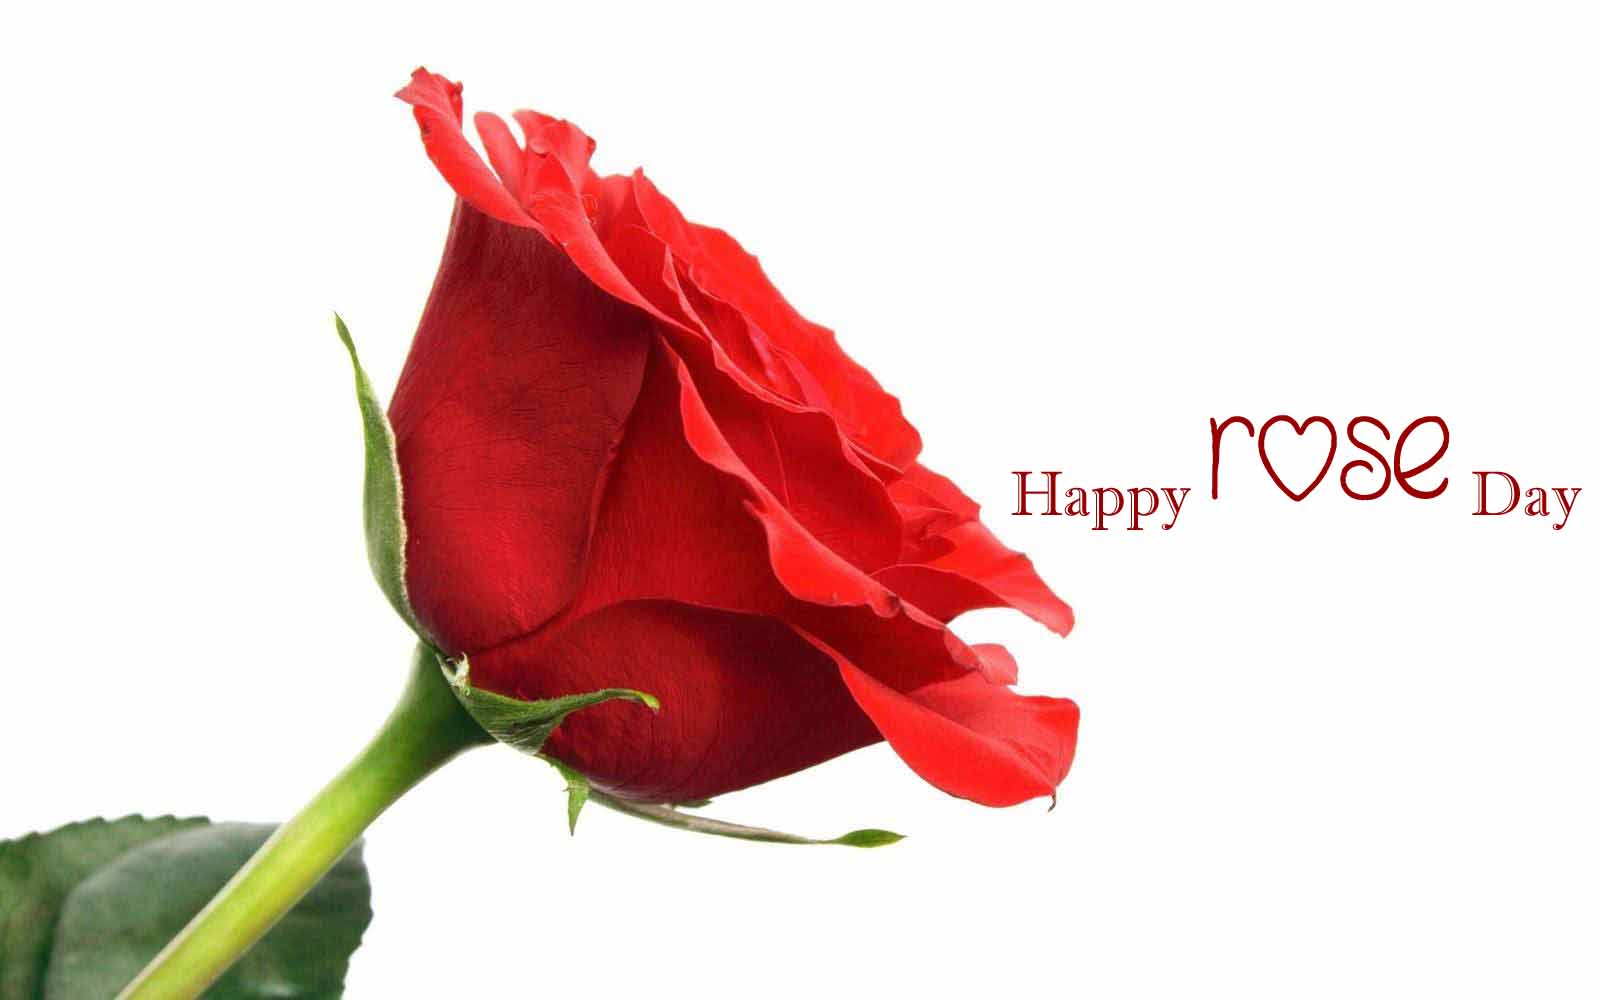 Happy Rose Day Images, Pics, Quotes, Wishes, Photos